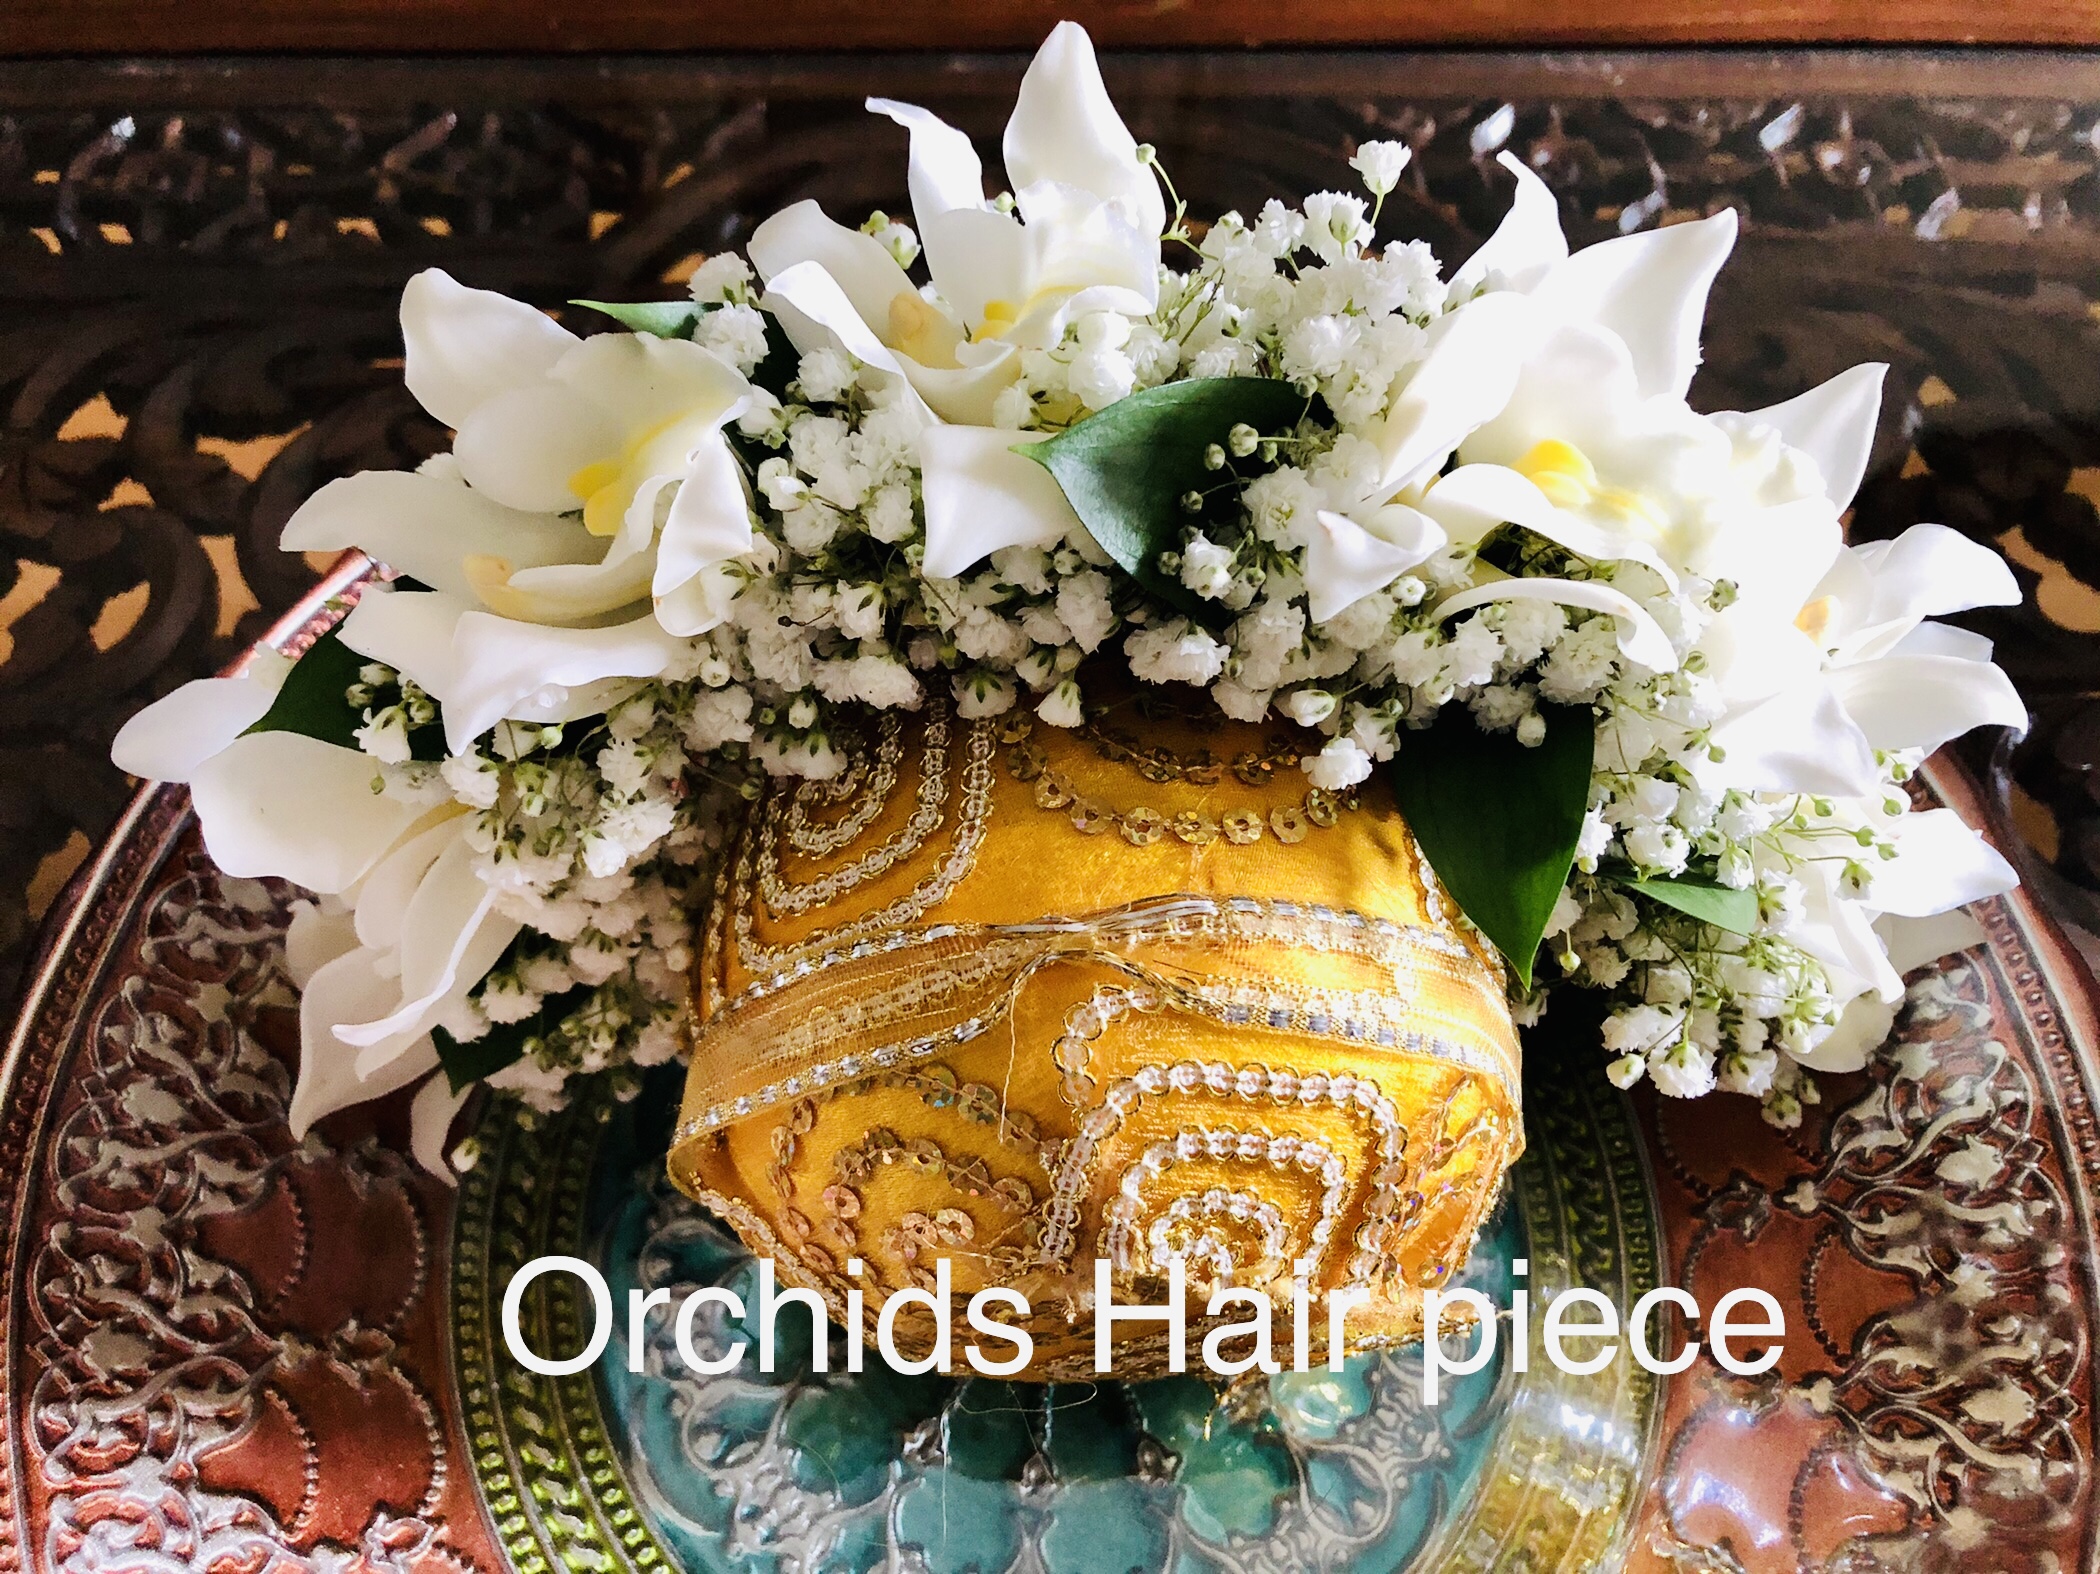 $75 - Hair Pc Orchids and Babys breath            